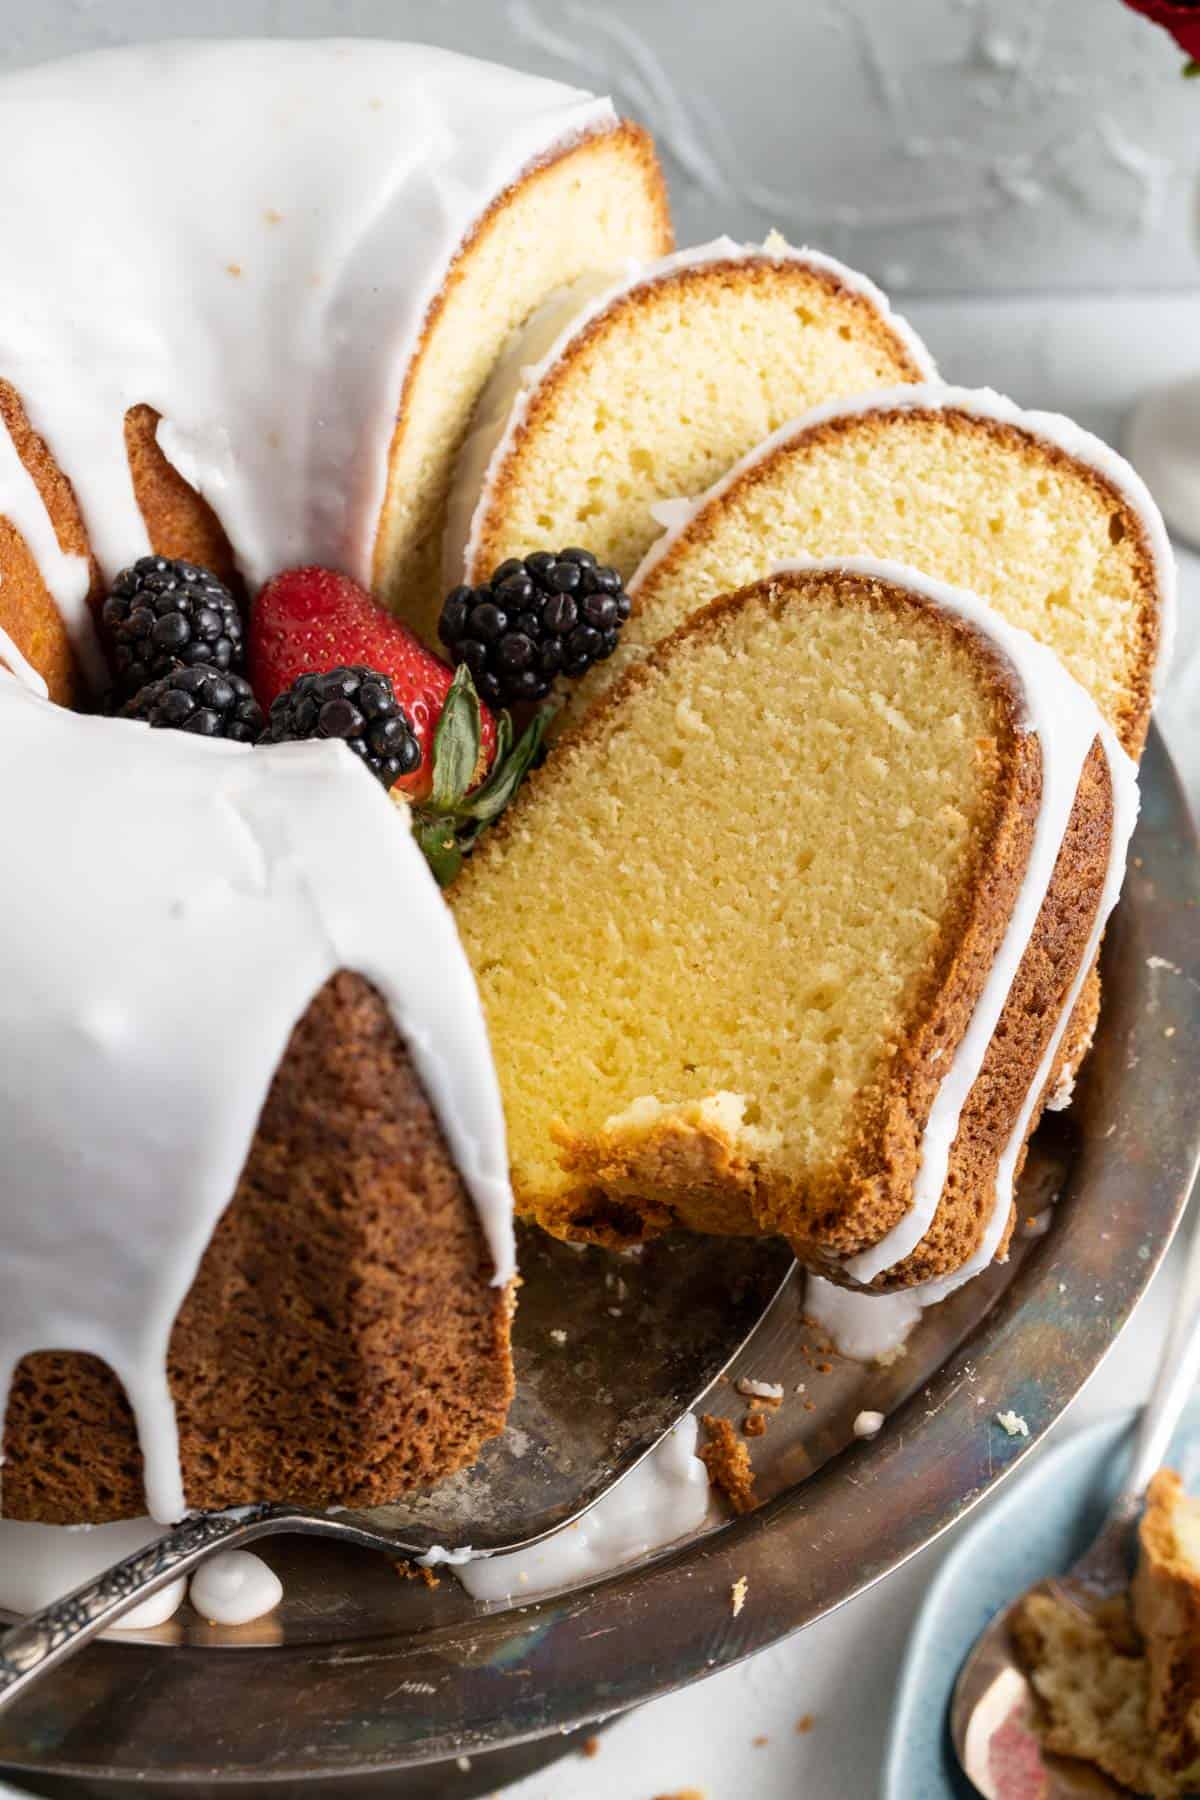 Old fashioned sour cream pound cake with icing over it and the middle filled with berries.